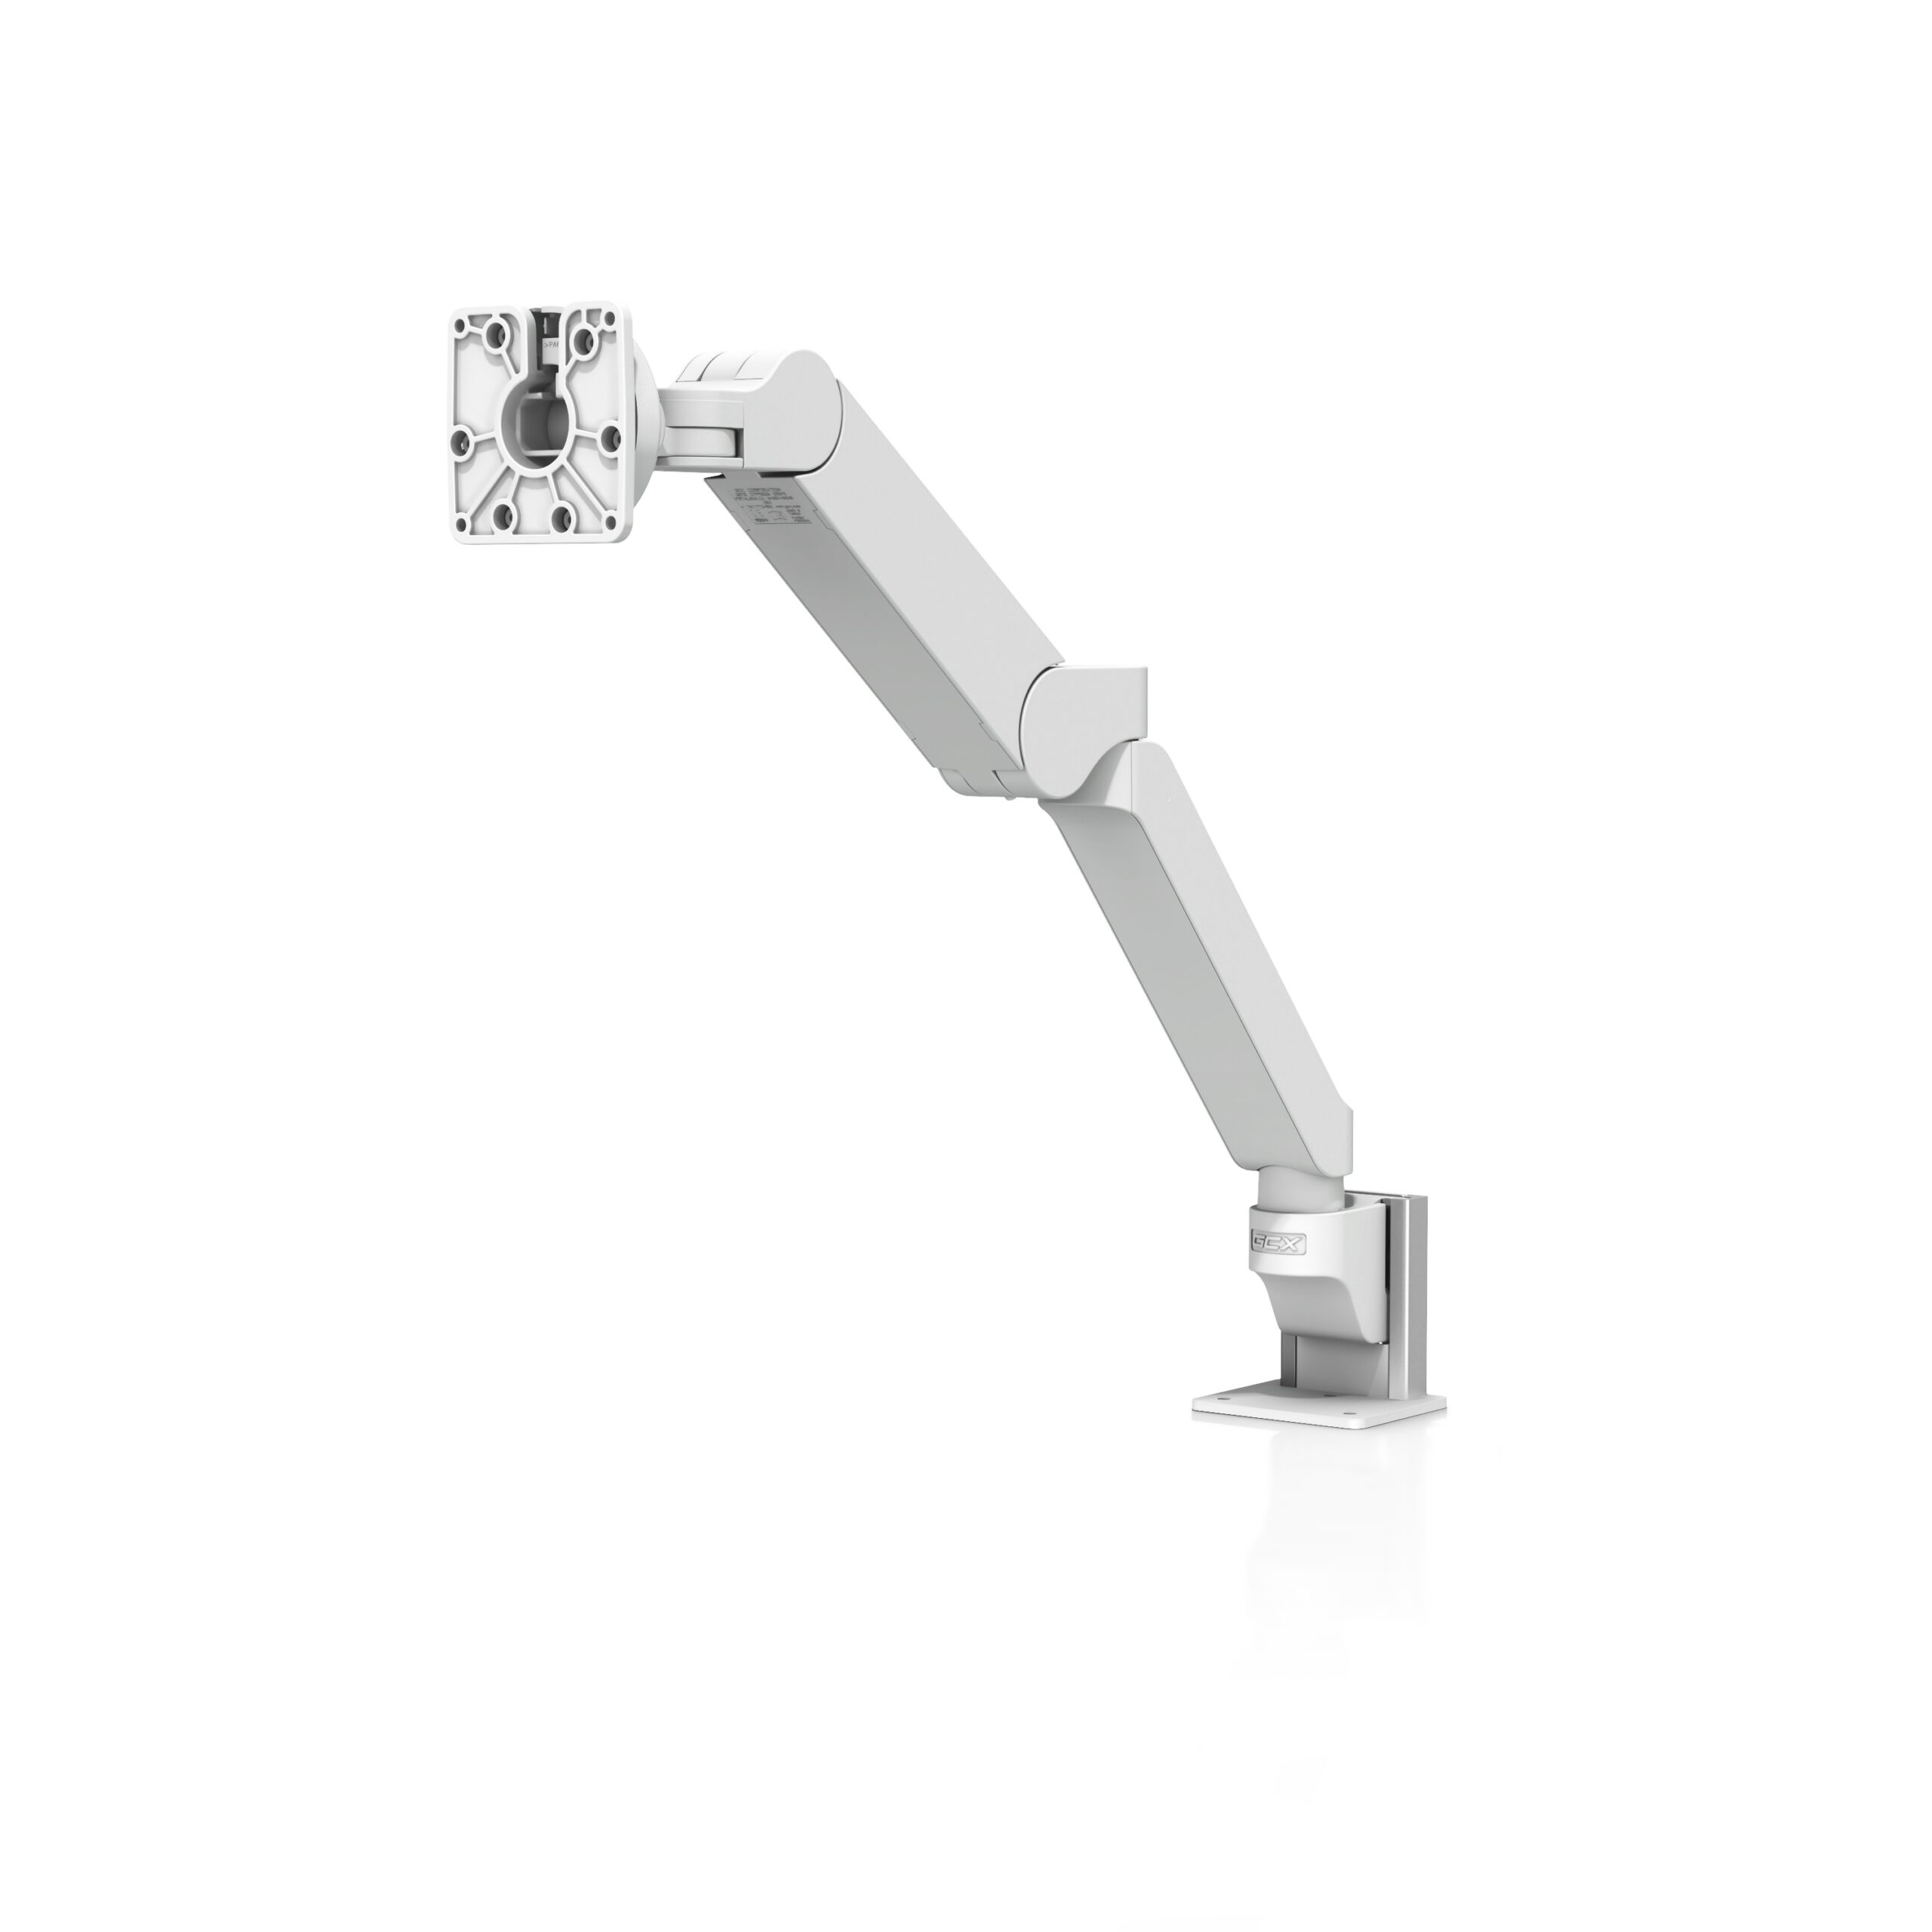 Countertop Mount for VHM-T Variable Height Arm for Tablets with Extension Unloaded